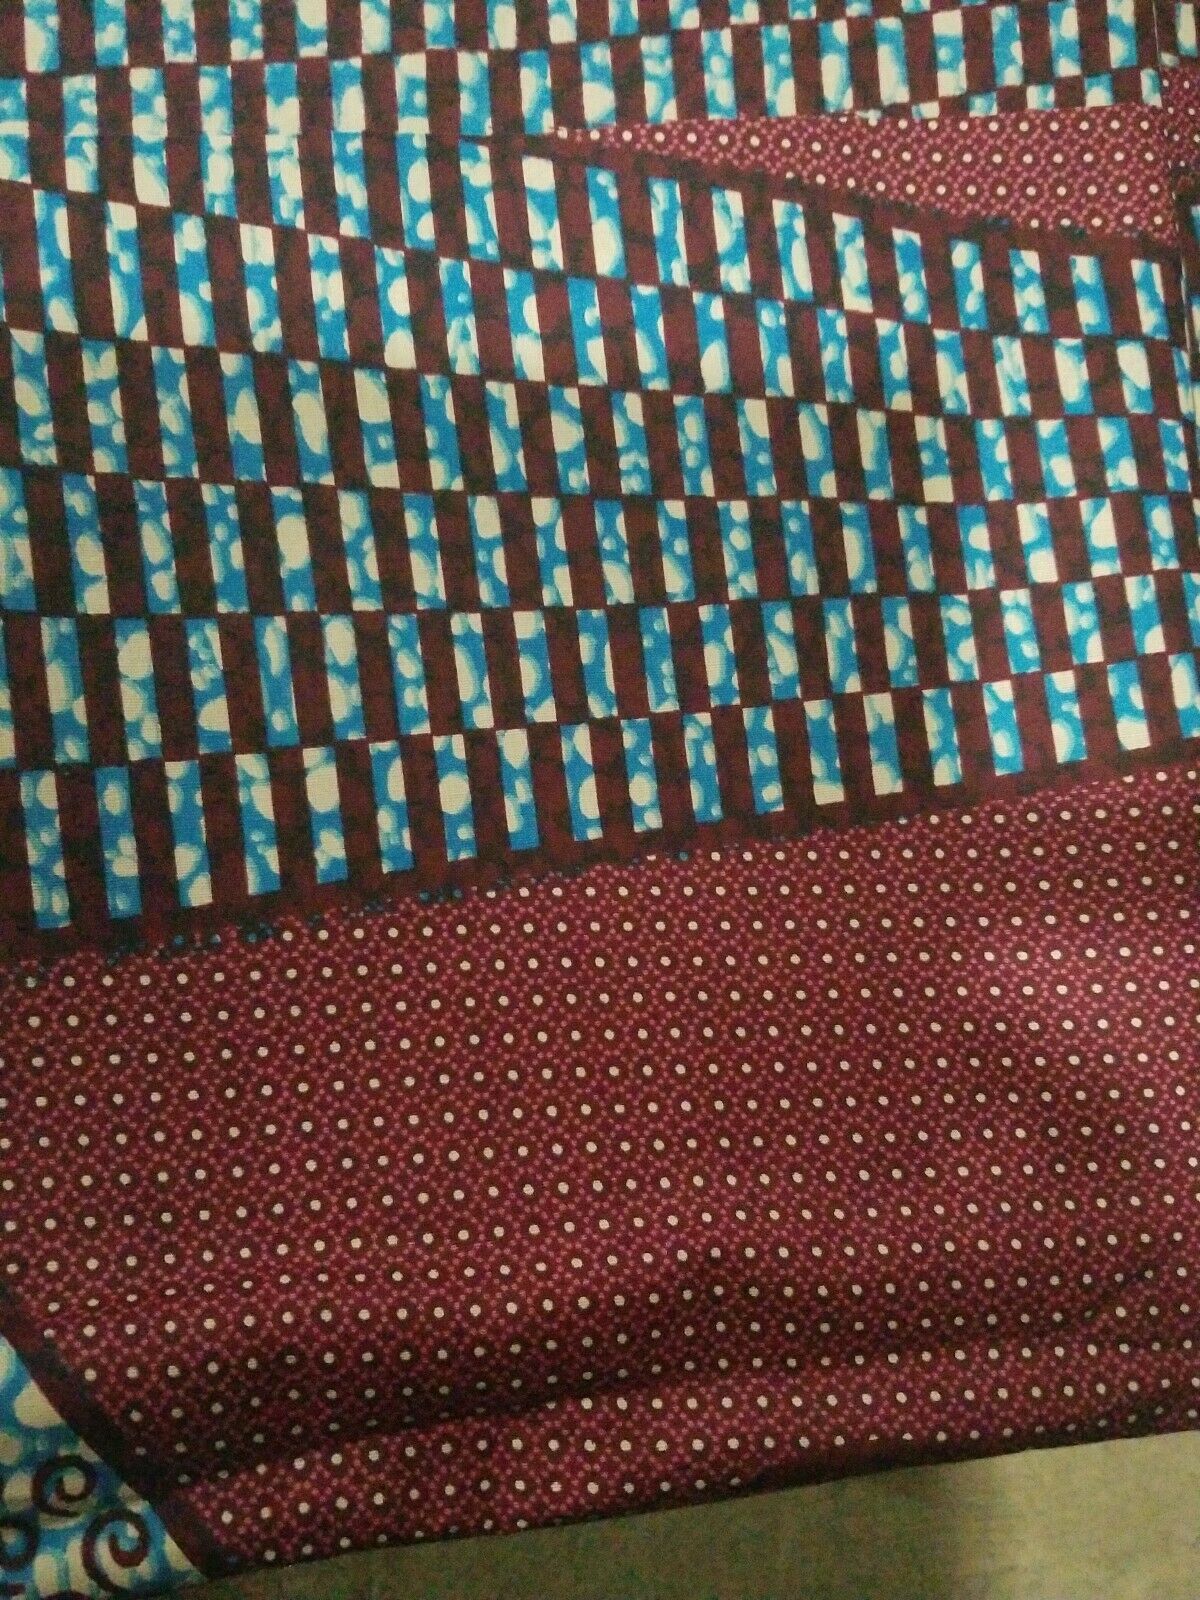 Brown MultiAfrican Print 100% Cotton Fabric ~2yards×23"~$8.50